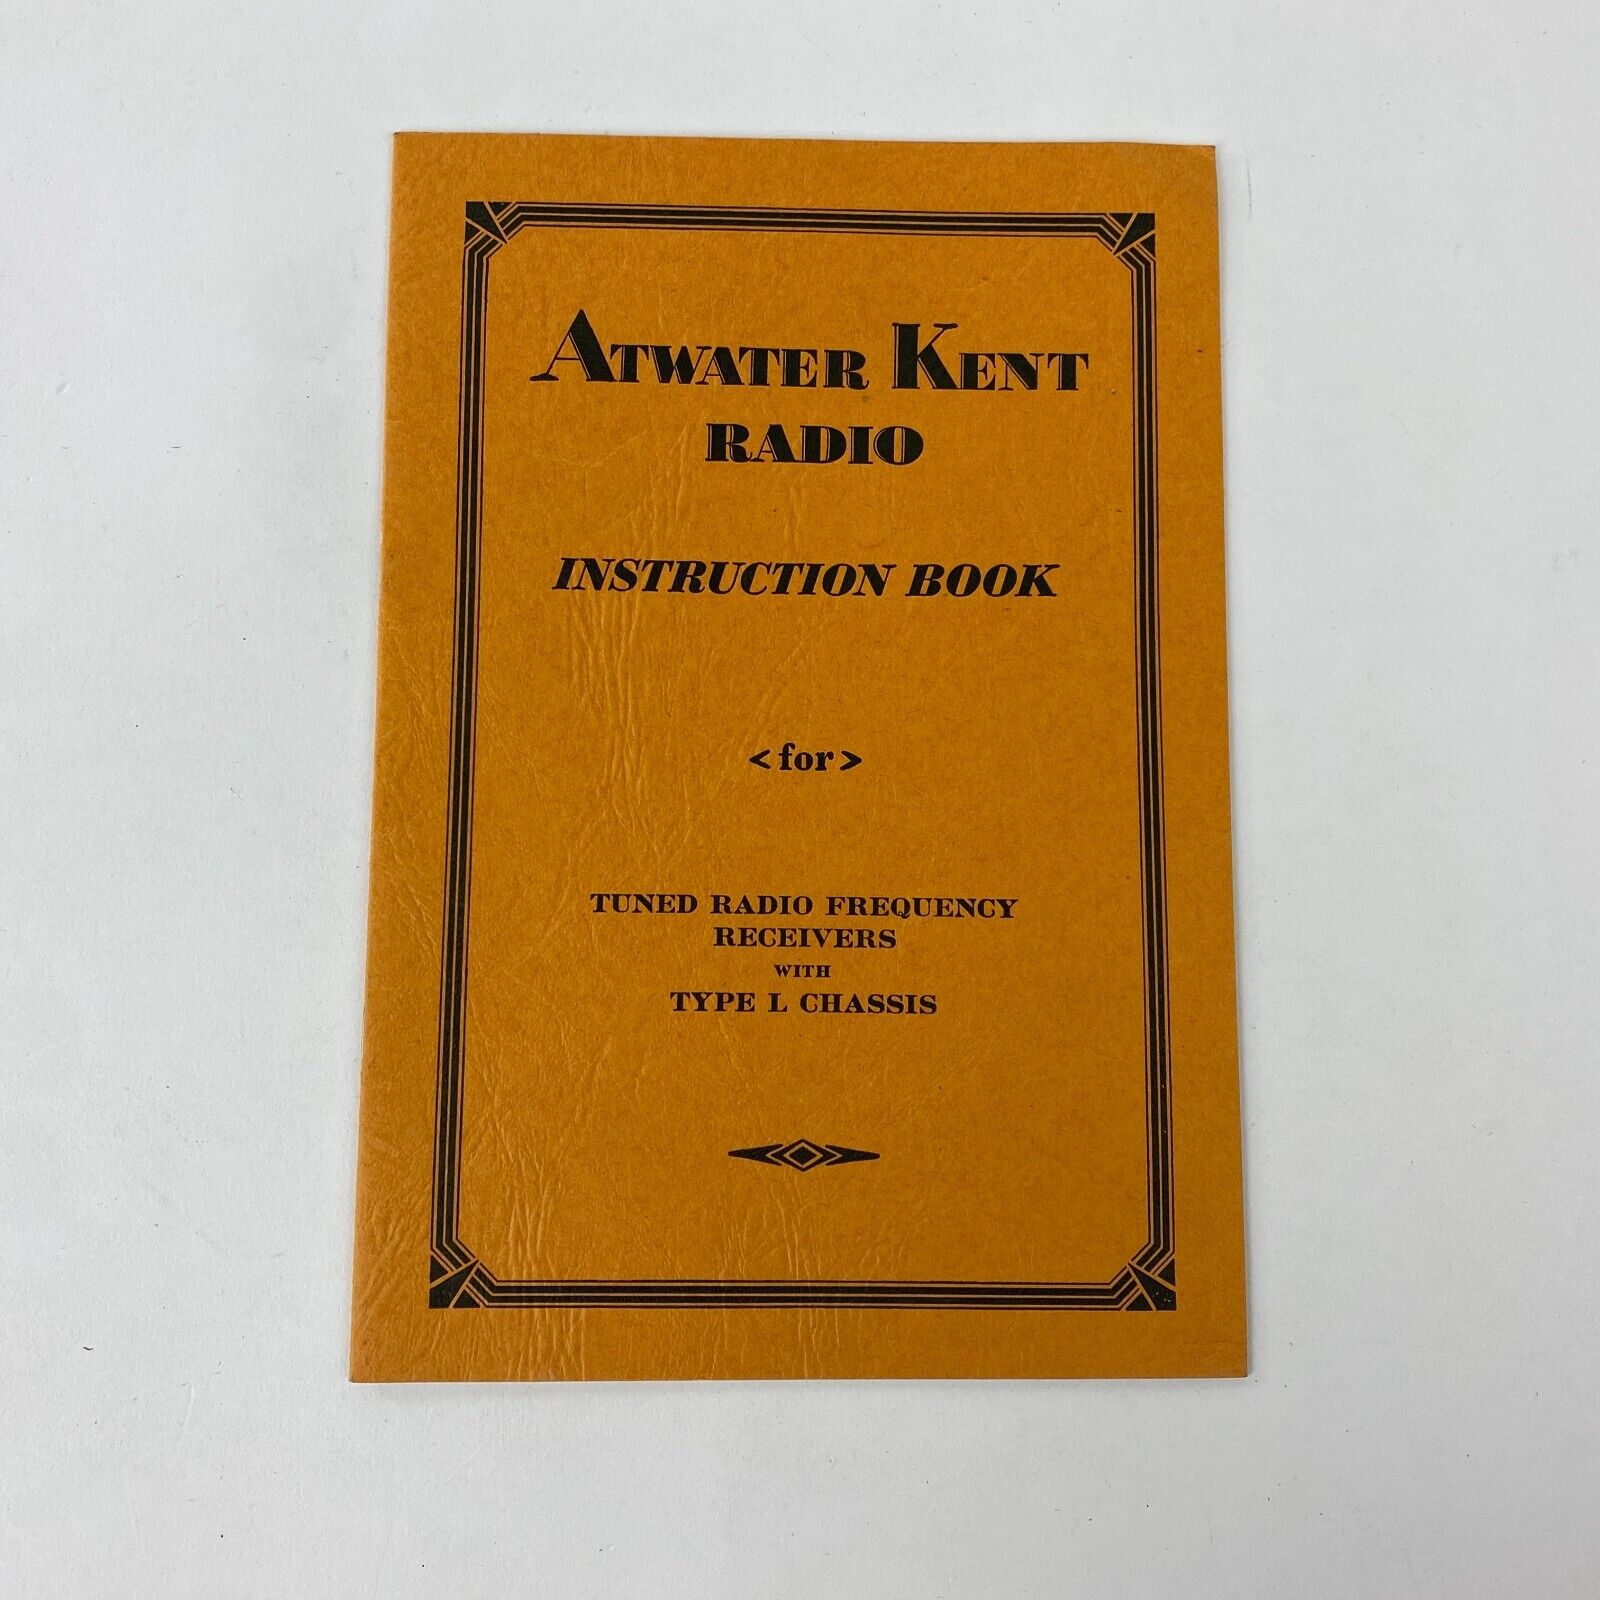 Atwater Kent Radio Instruction Book Tuned Radio Frequency Receivers 1930